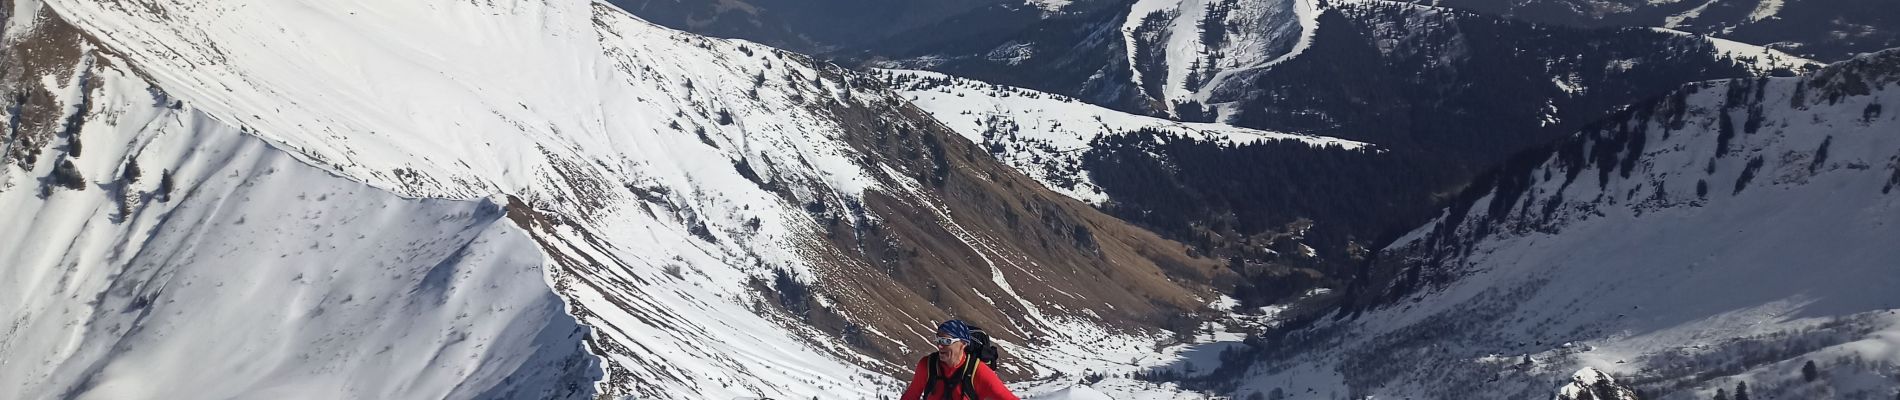 Trail Touring skiing Taninges - pointe de Chalune  - Photo